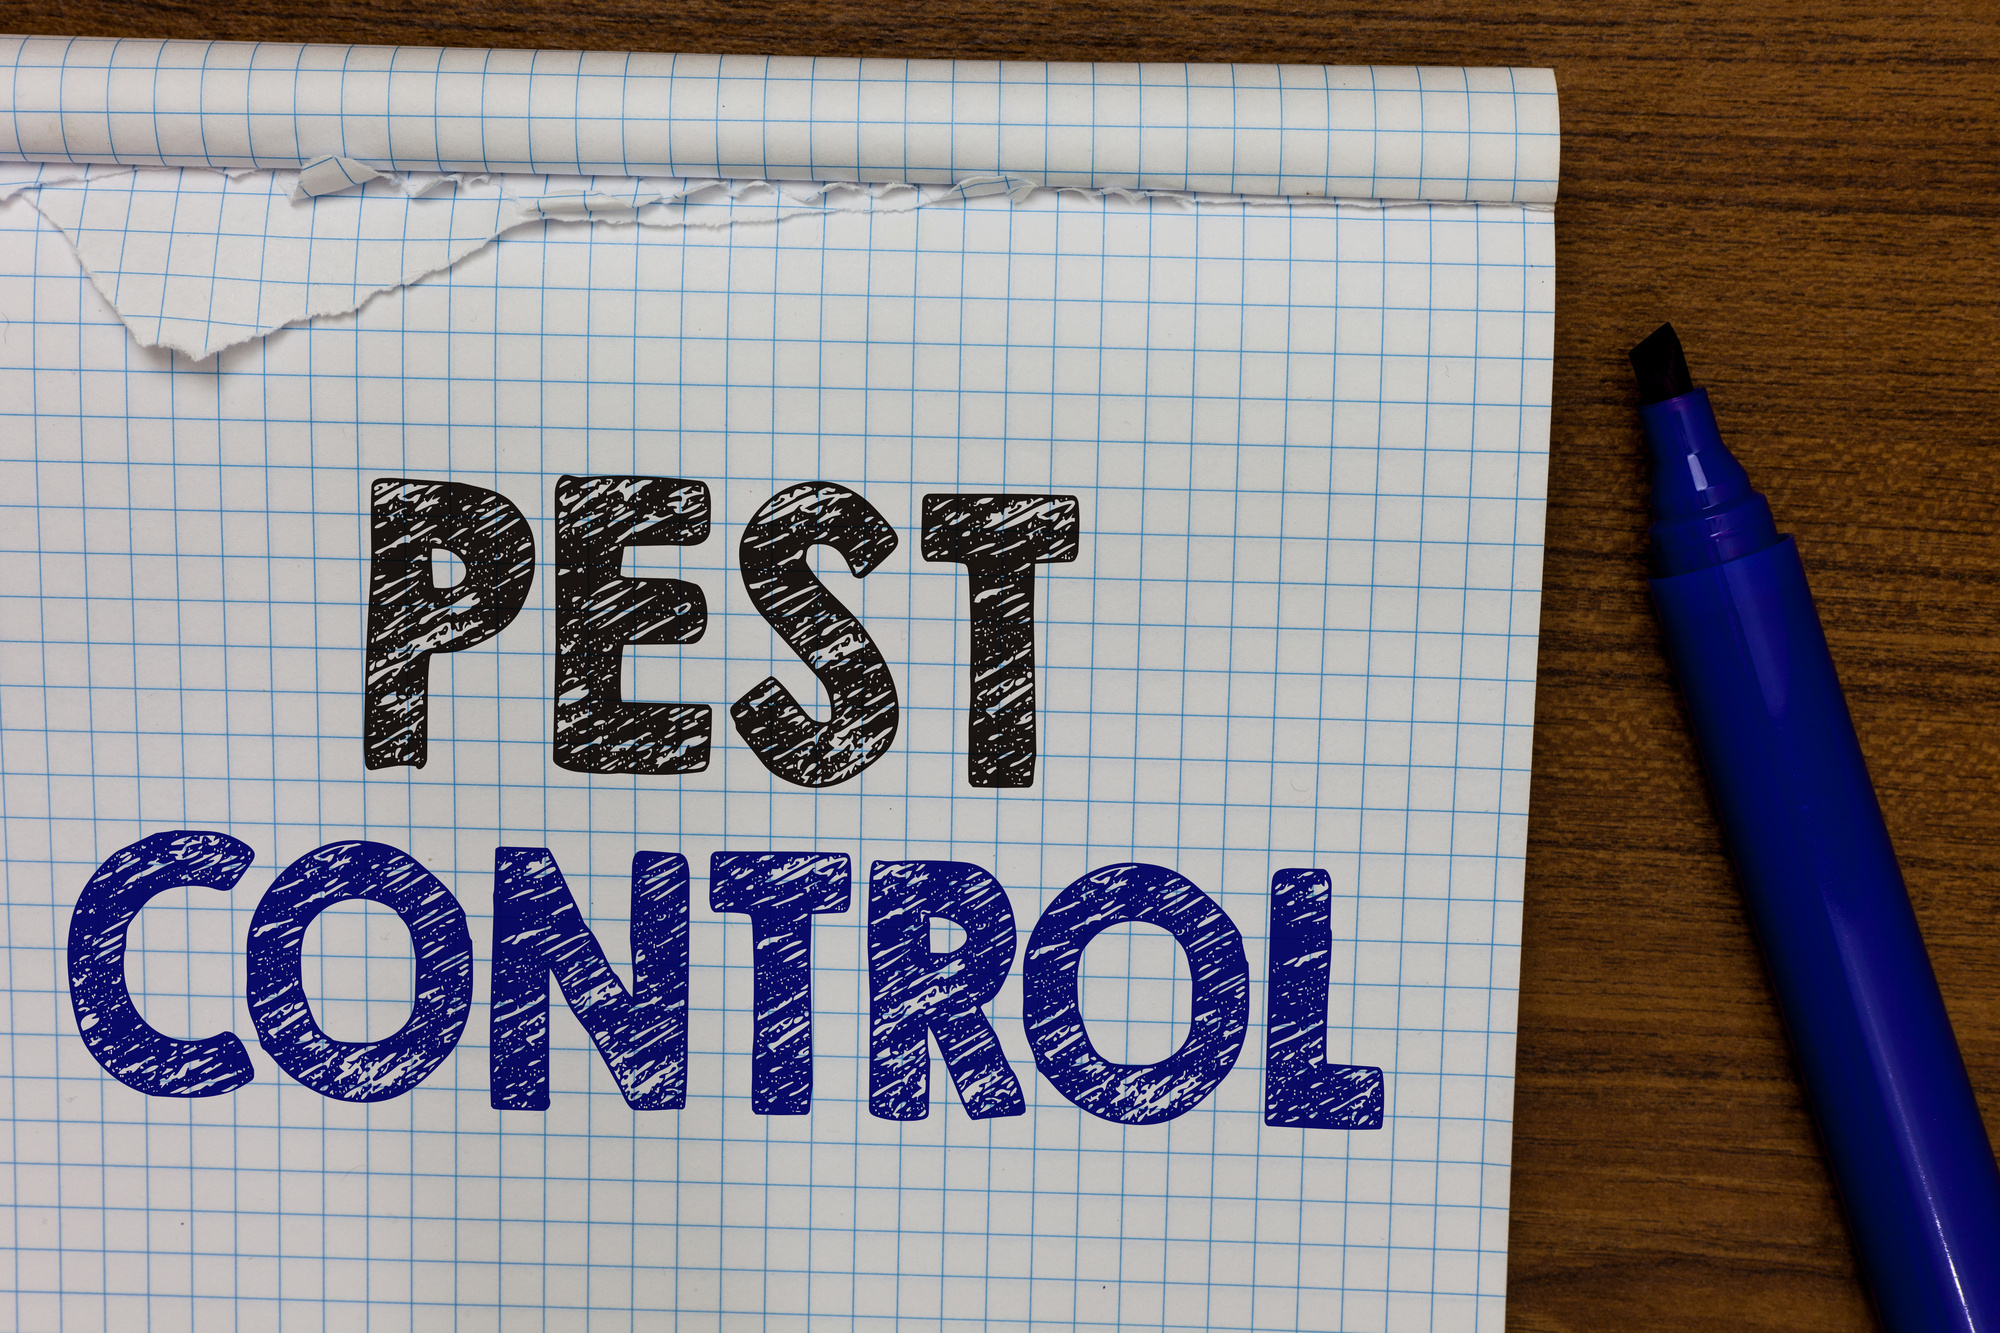 Pest control services are incredibly important to help maintain your home. Here's why pest control services are so important.